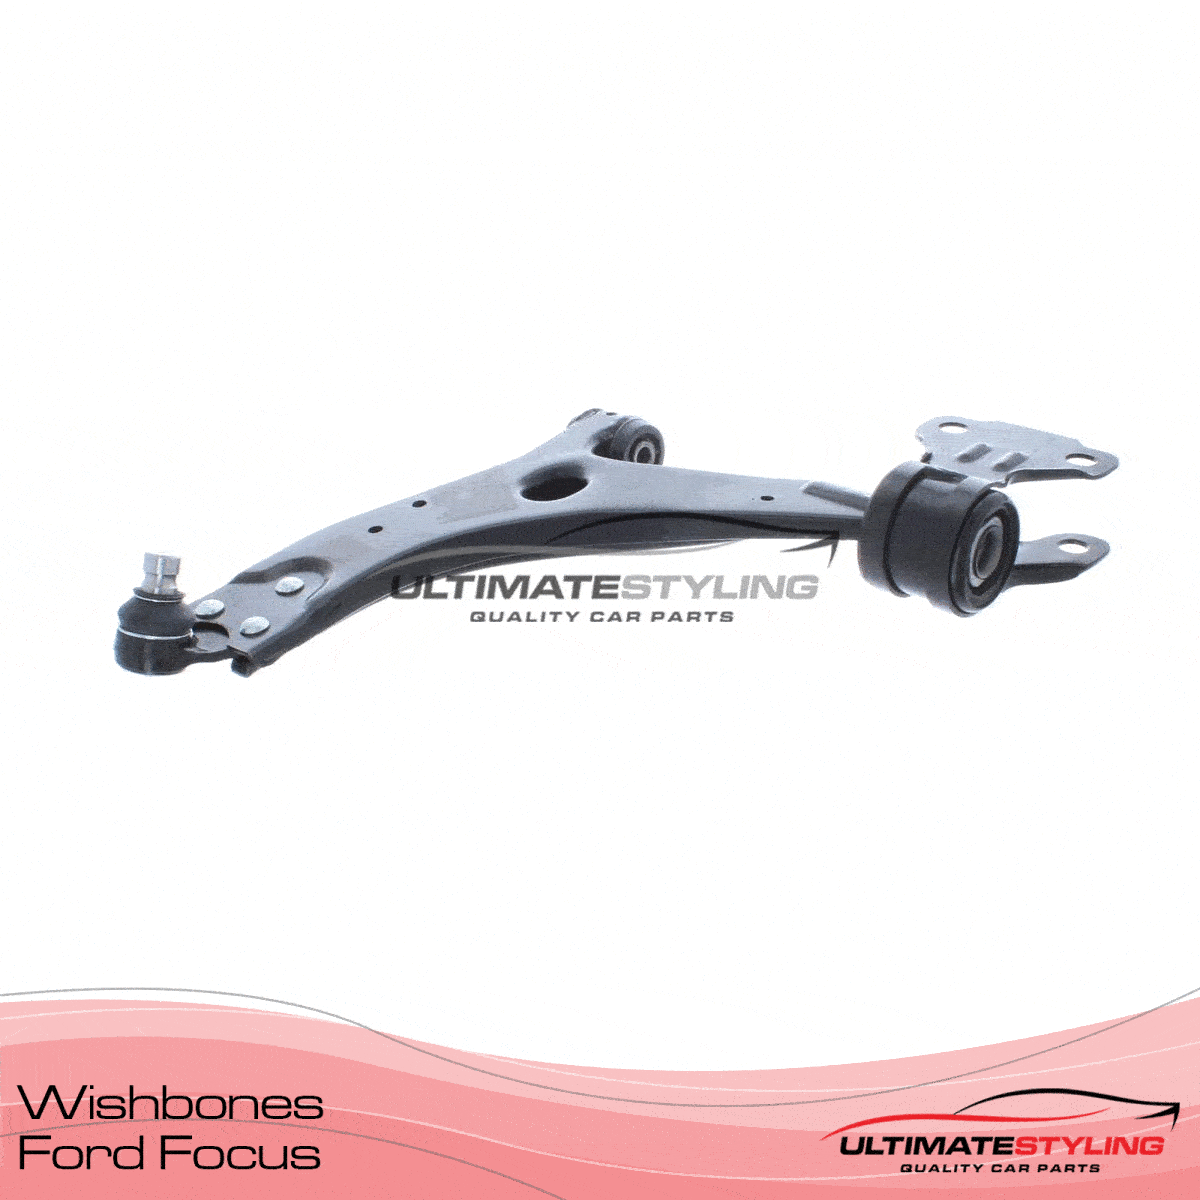 360 view of Ford Focus wishbone